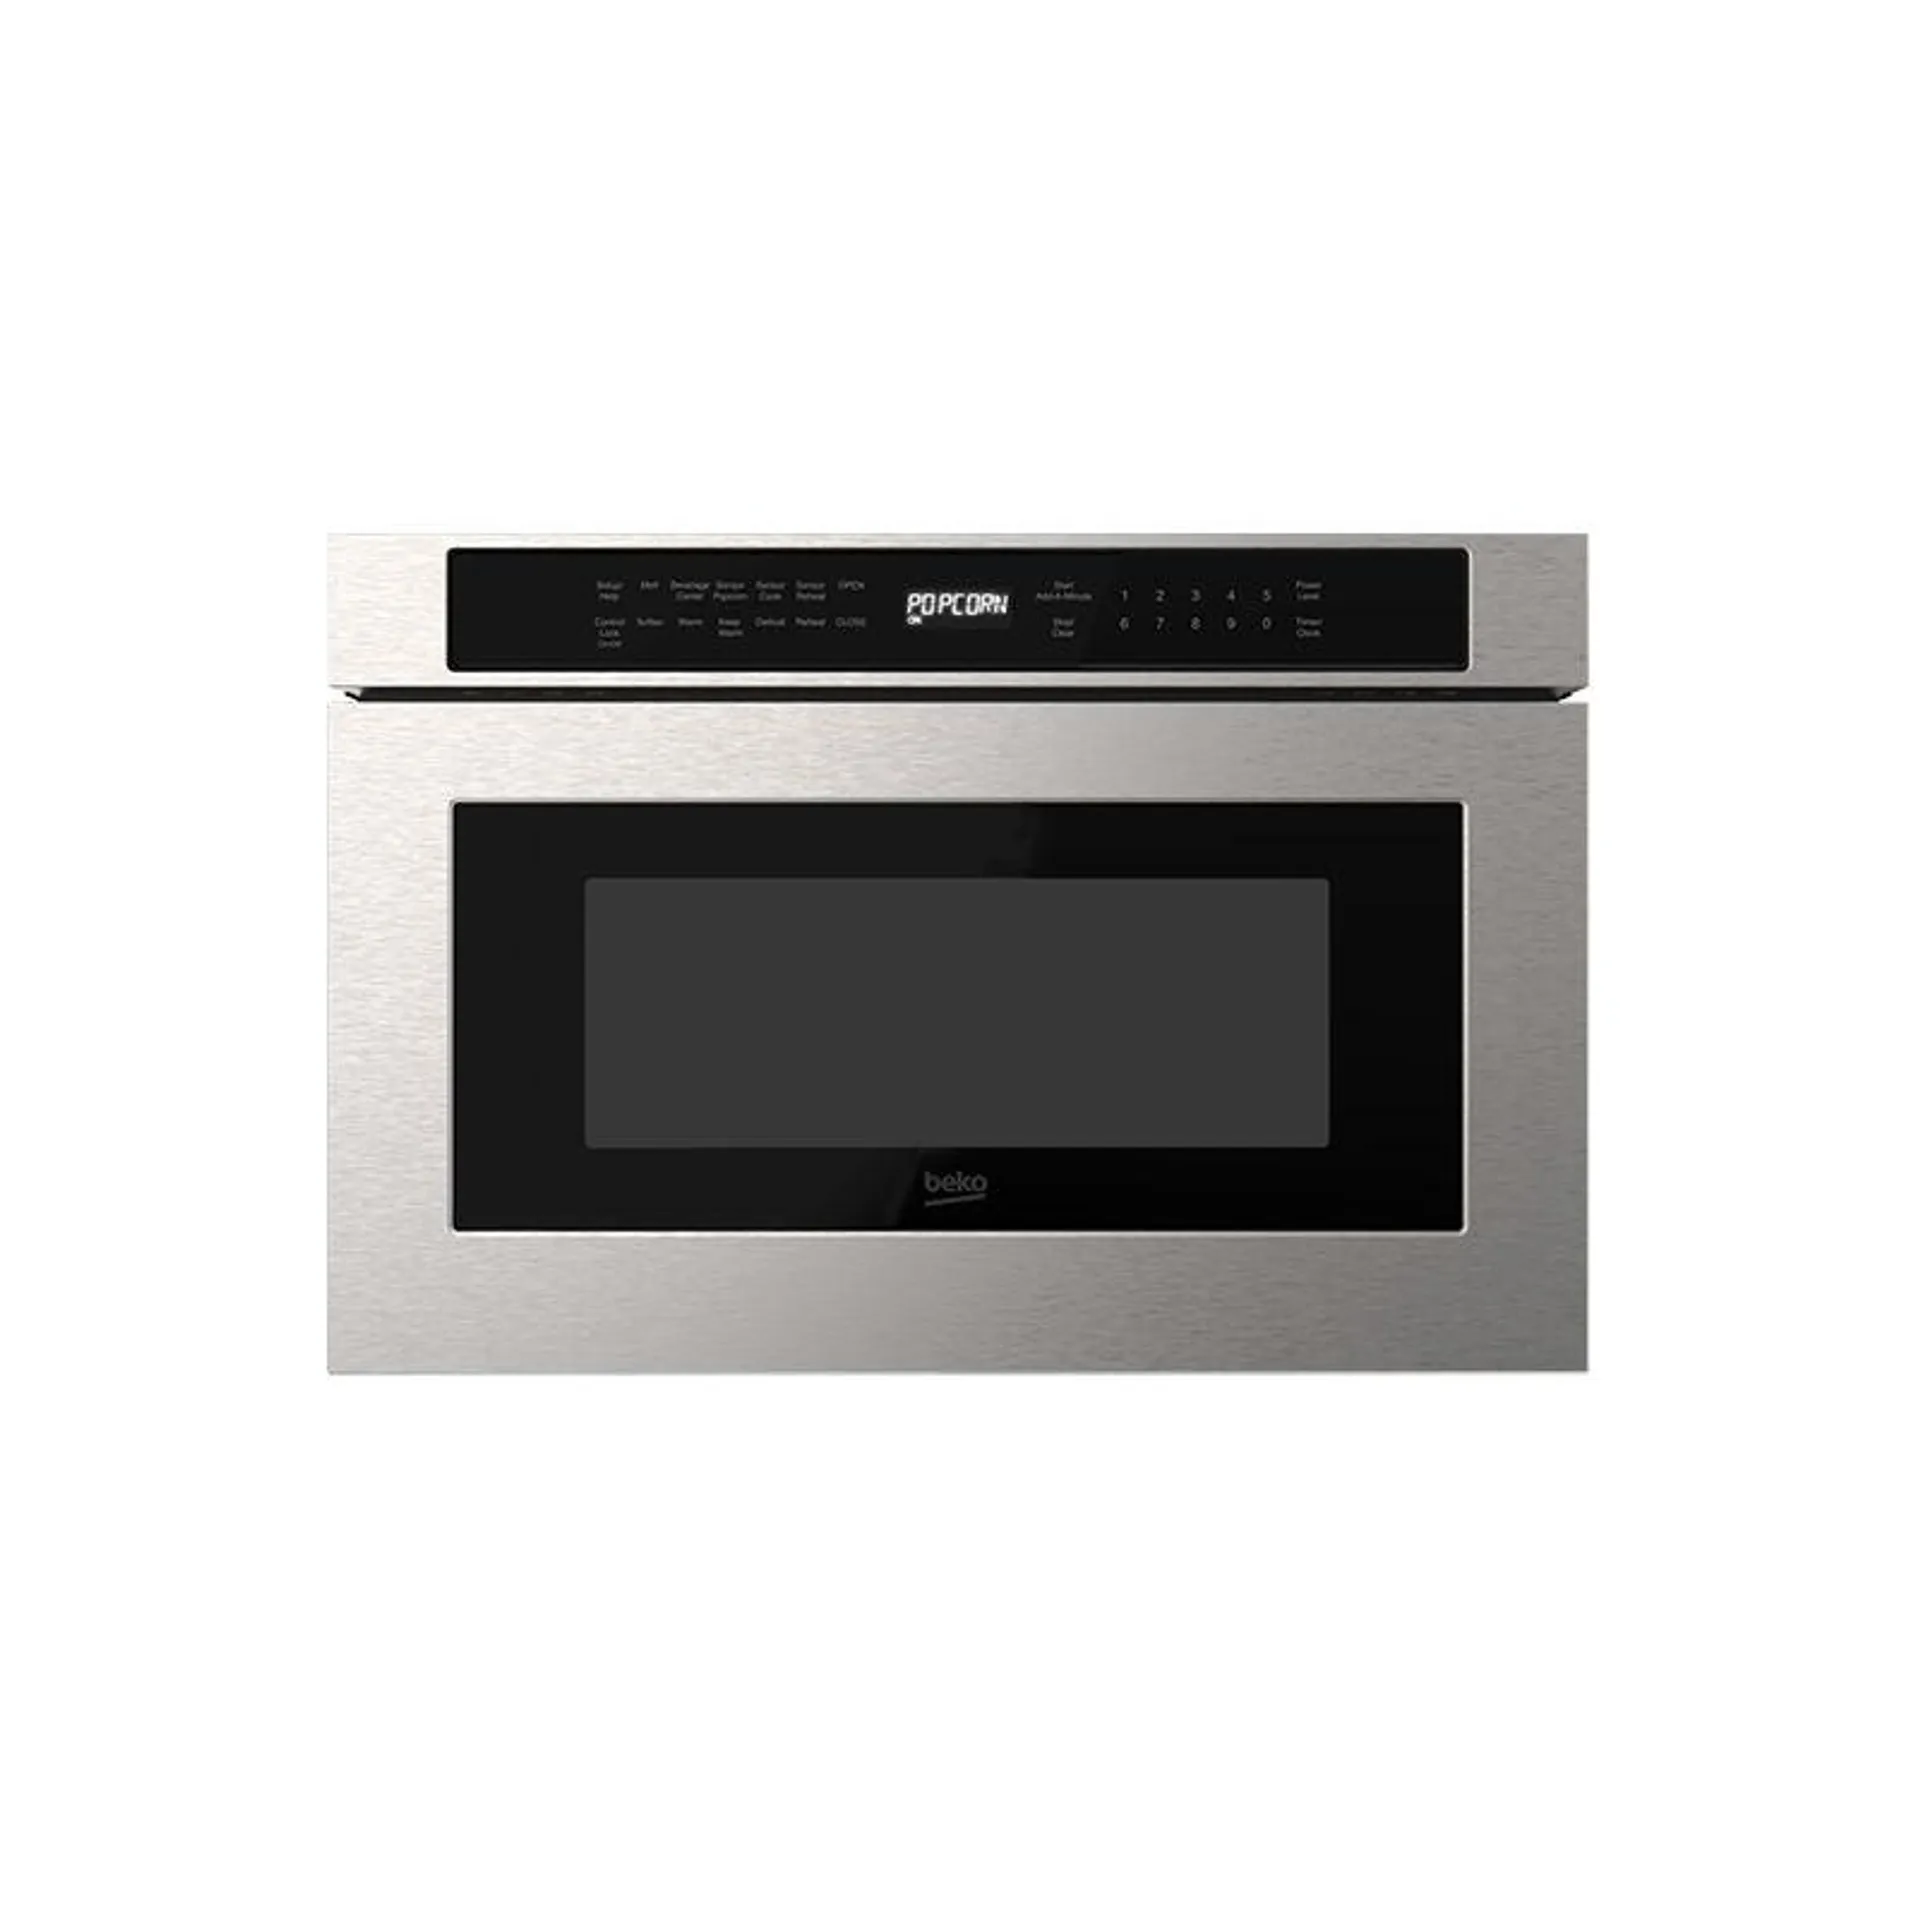 Beko 24 In. 1.2 cu. ft. Built-in Microwave with 10 Power Levels & Sensor Cooking Controls - Stainless Steel